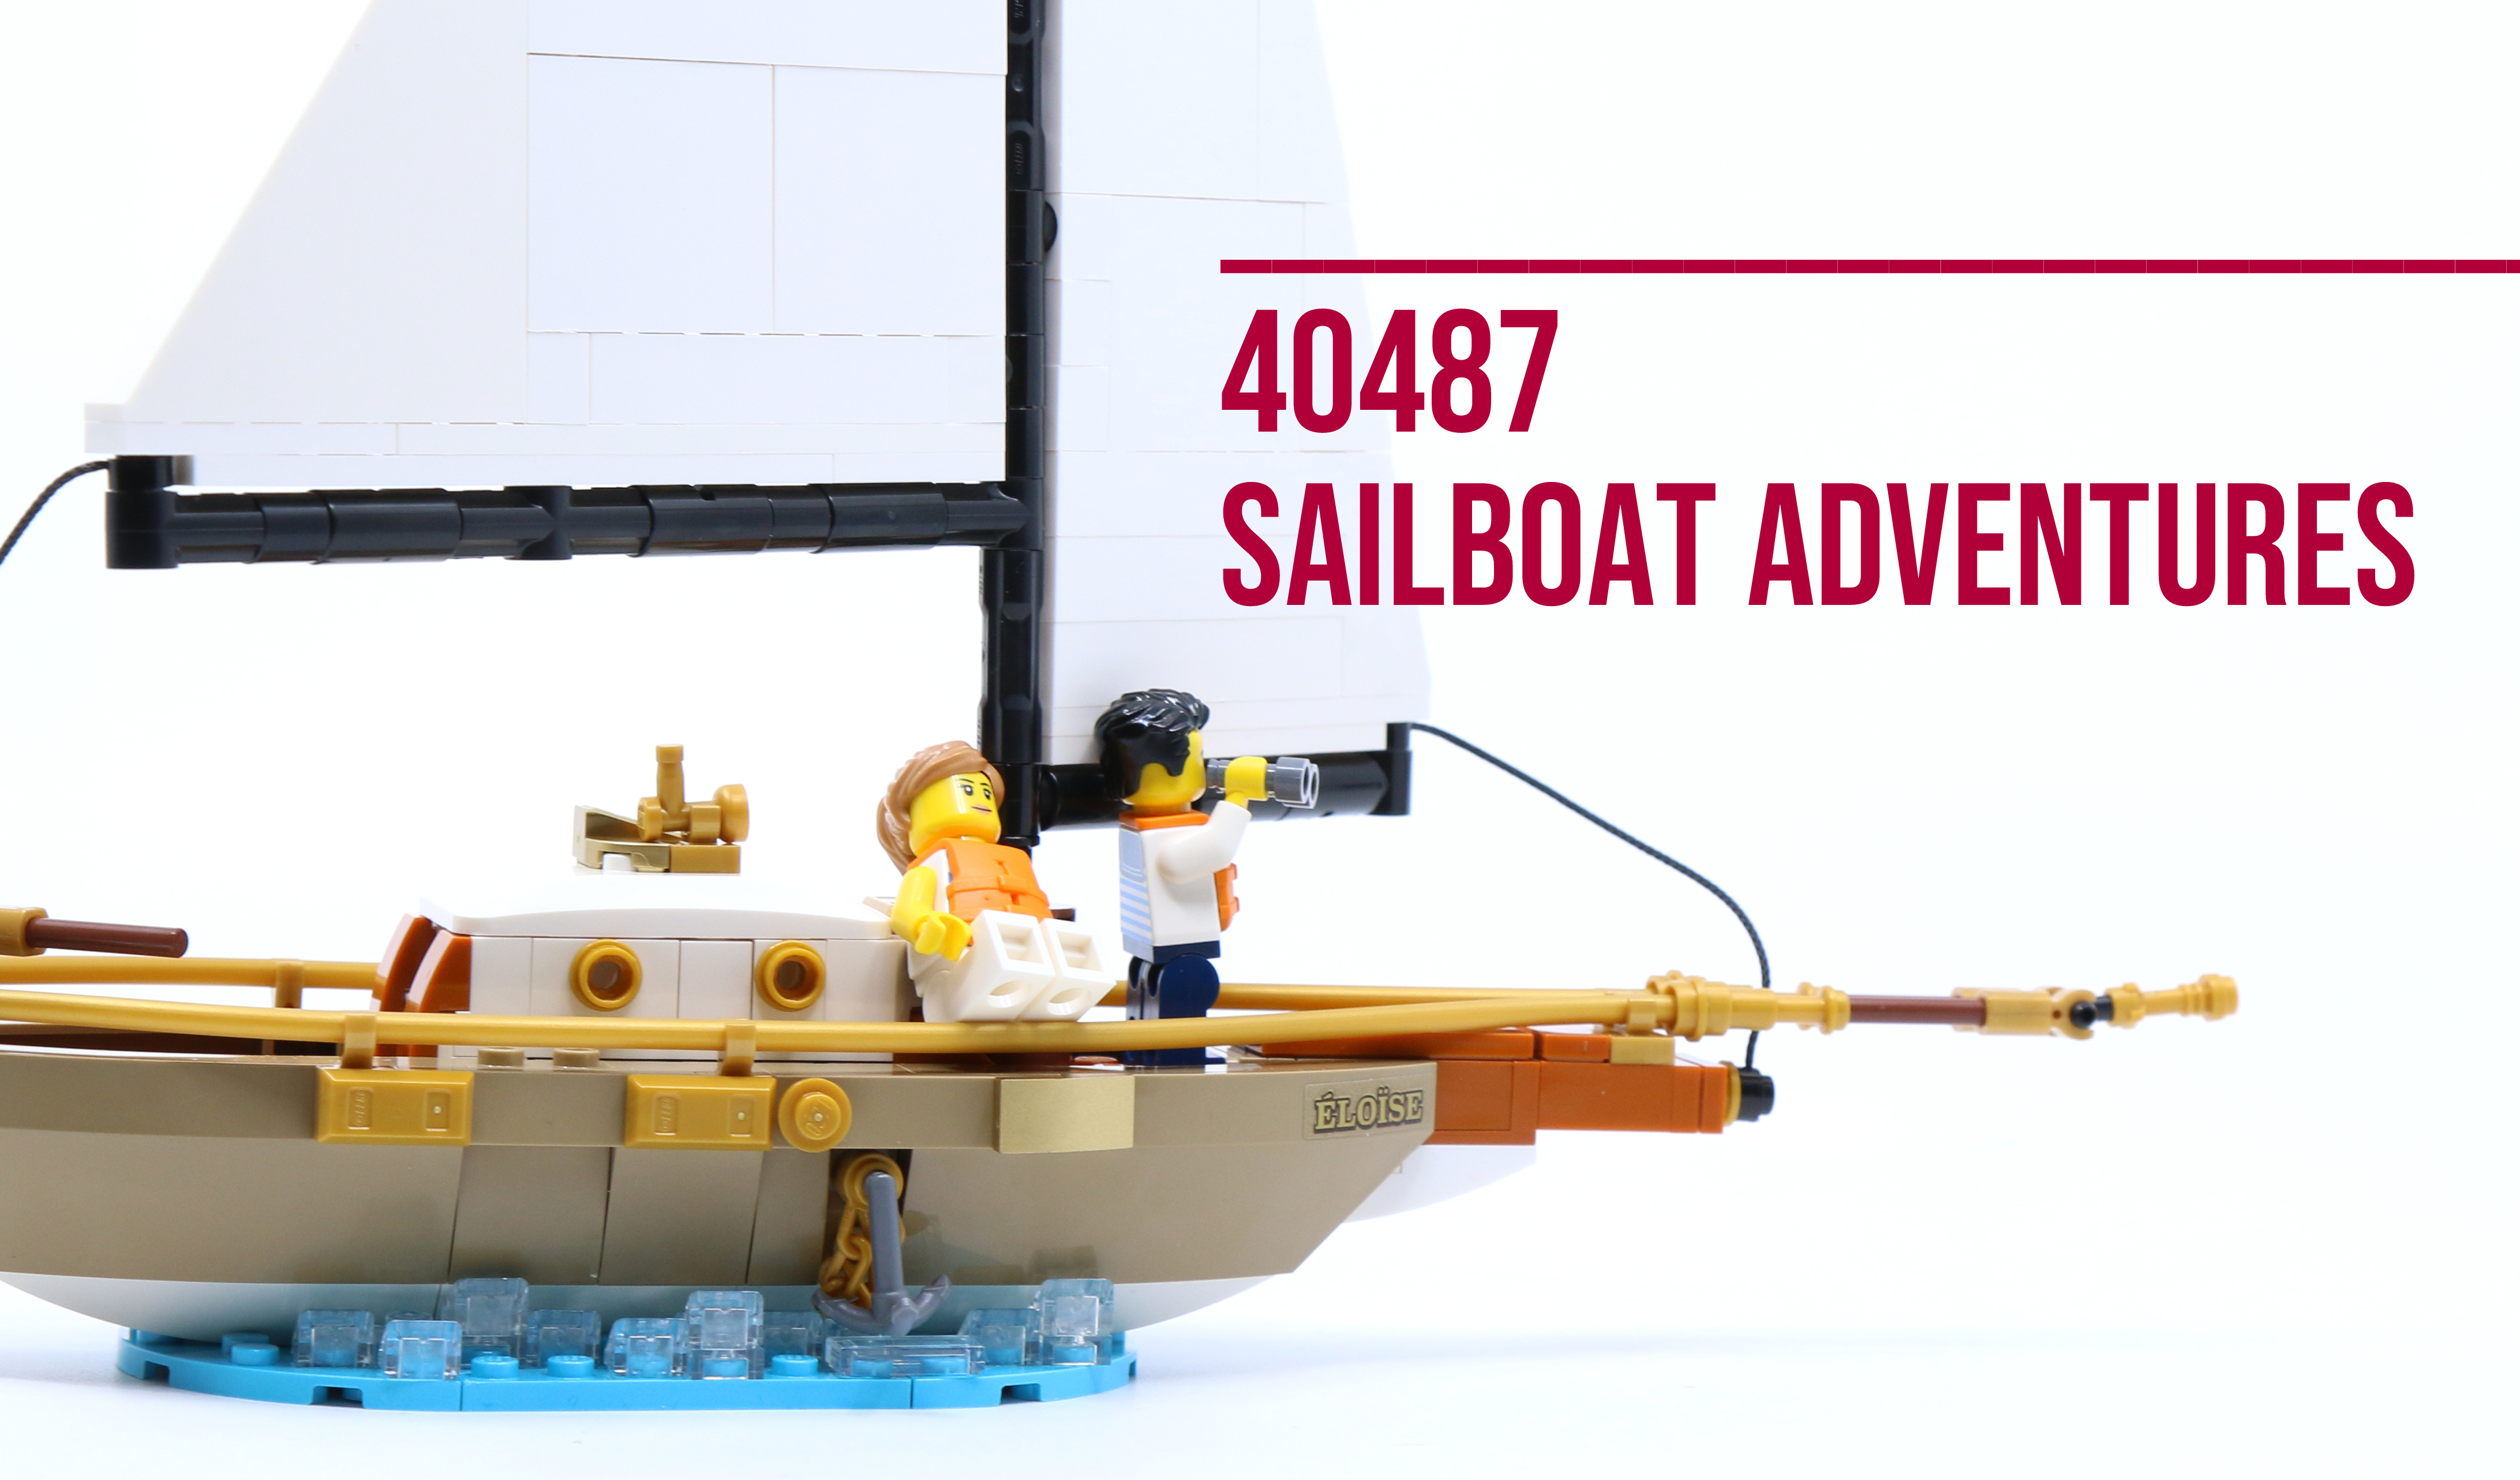 Review: LEGO Ideas 40487 Sailboat Adventures gift-with-purchase